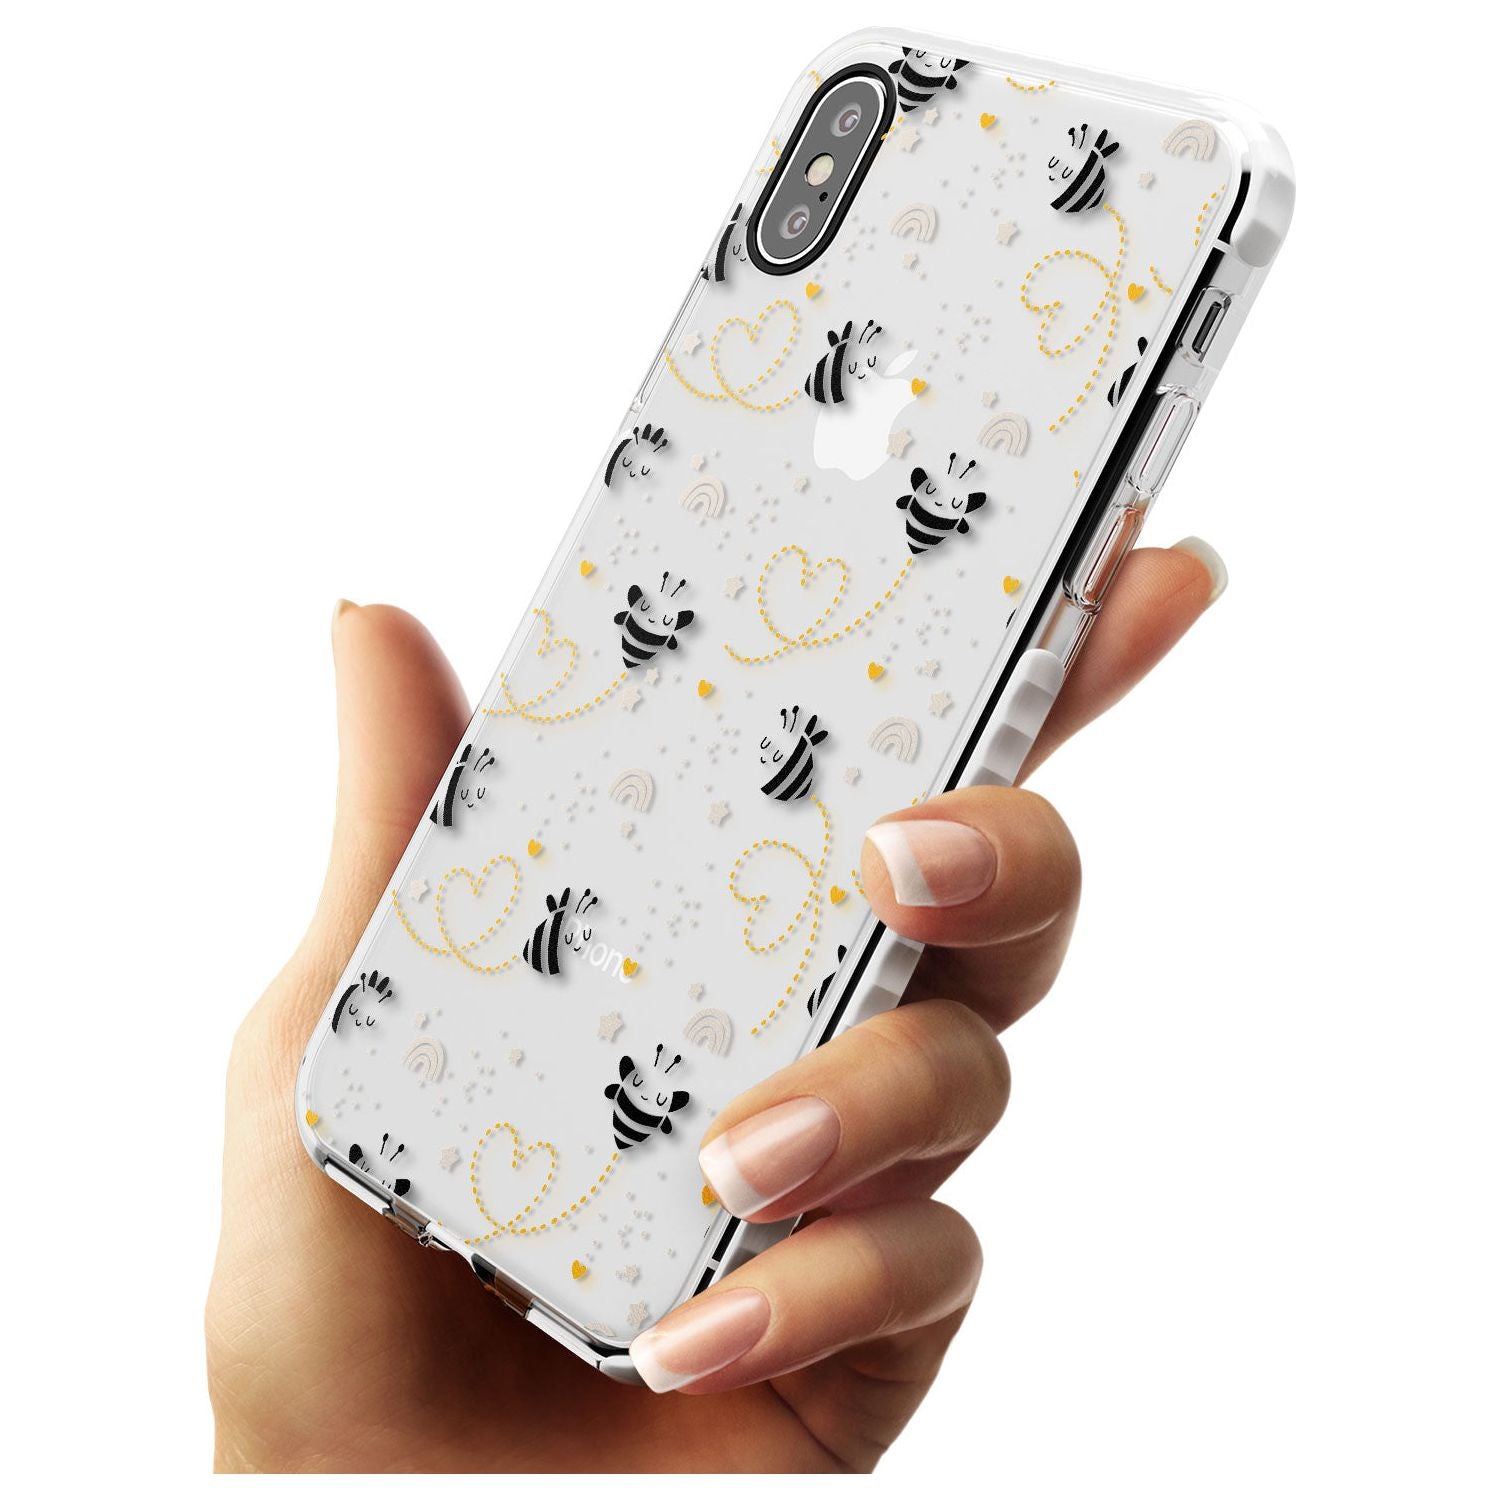 Sweet as Honey Patterns: Bees & Hearts (Clear) Impact Phone Case for iPhone X XS Max XR